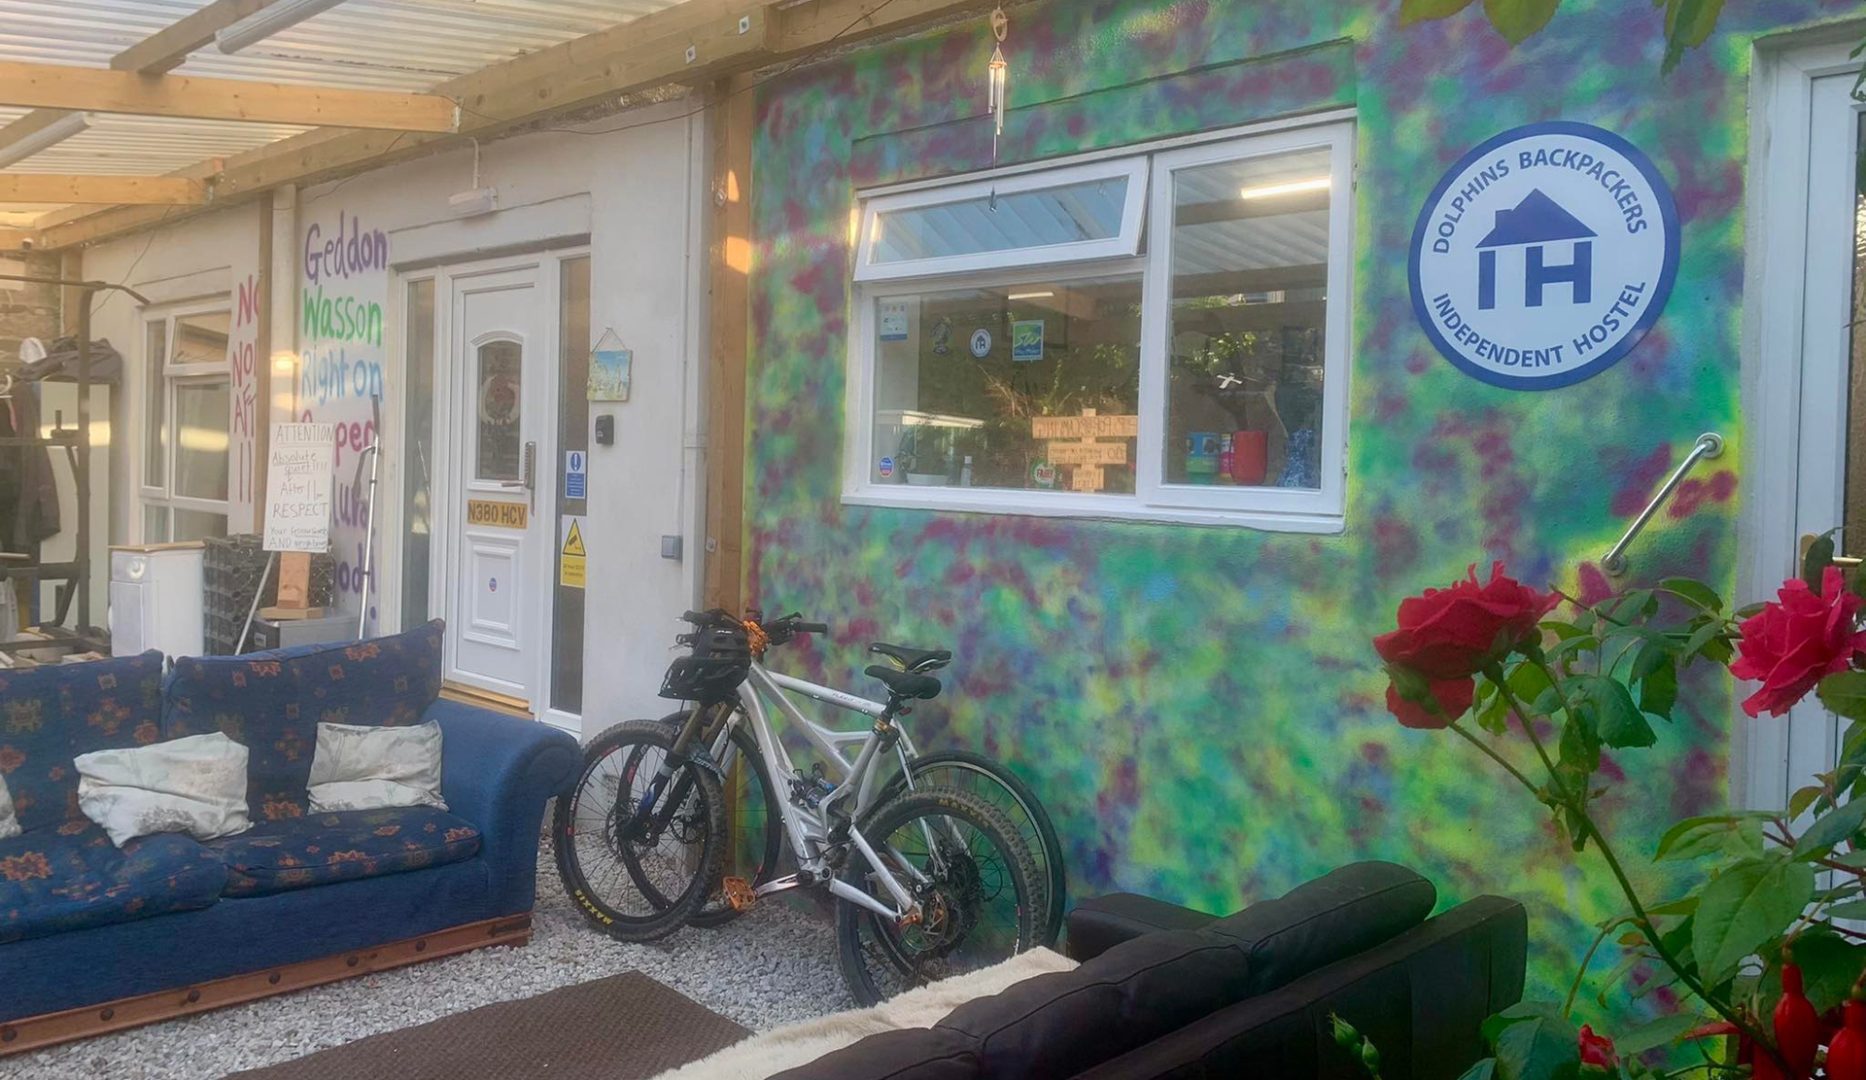 Covered entrance with roed rose, 2 bikes and Independent Hostels sign